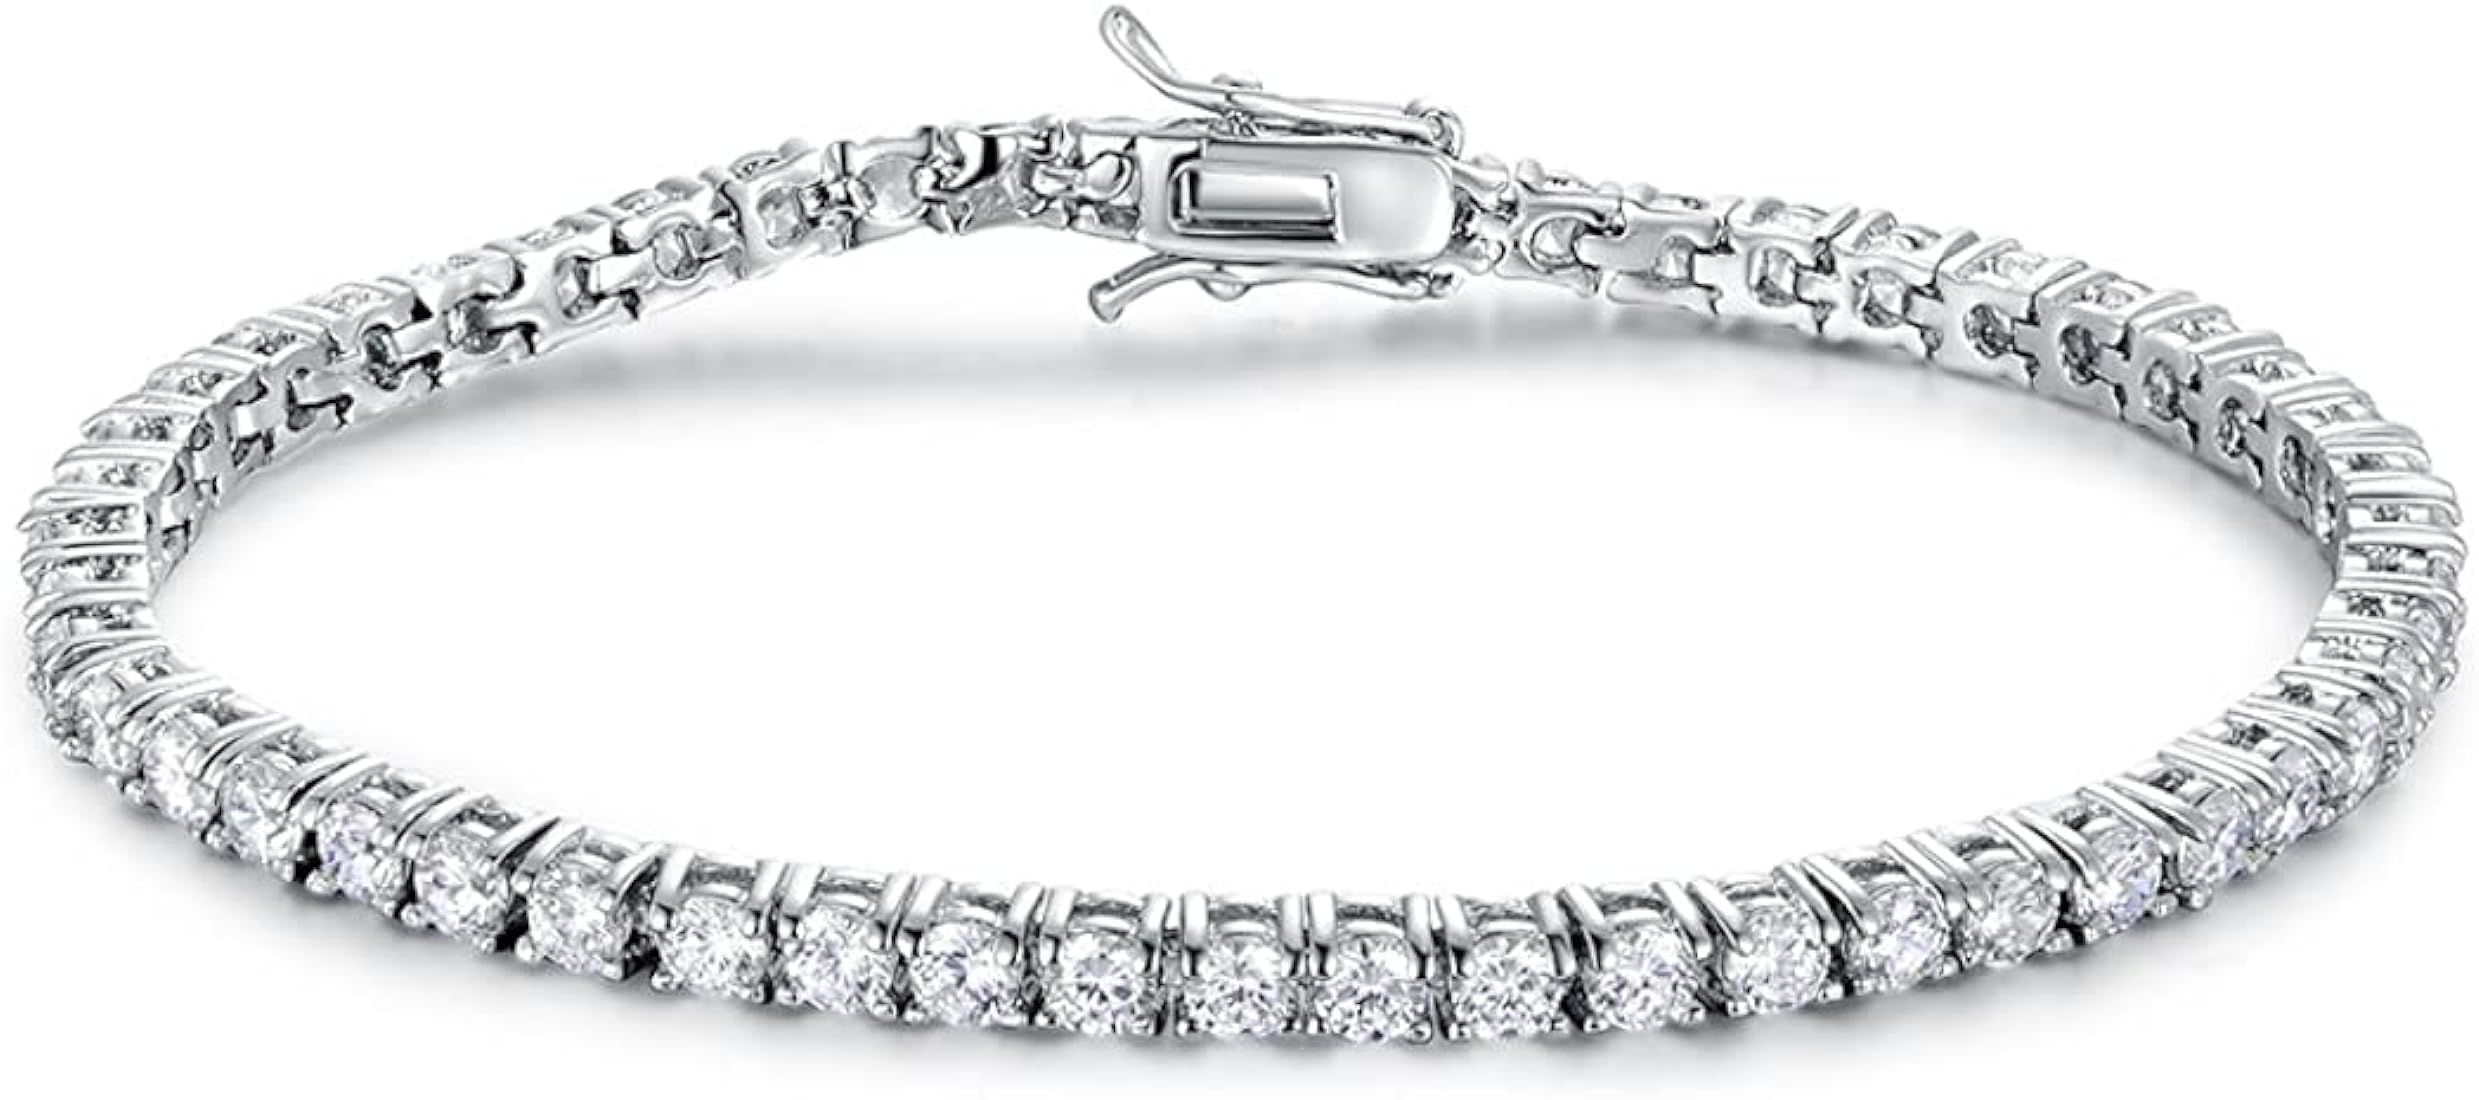 GMESME 18K White Gold Plated 3.0mm Cubic Zirconia Classic Tennis Bracelet 6/6.5/7/7.5/8/8.5/9 Inch | Amazon (US)